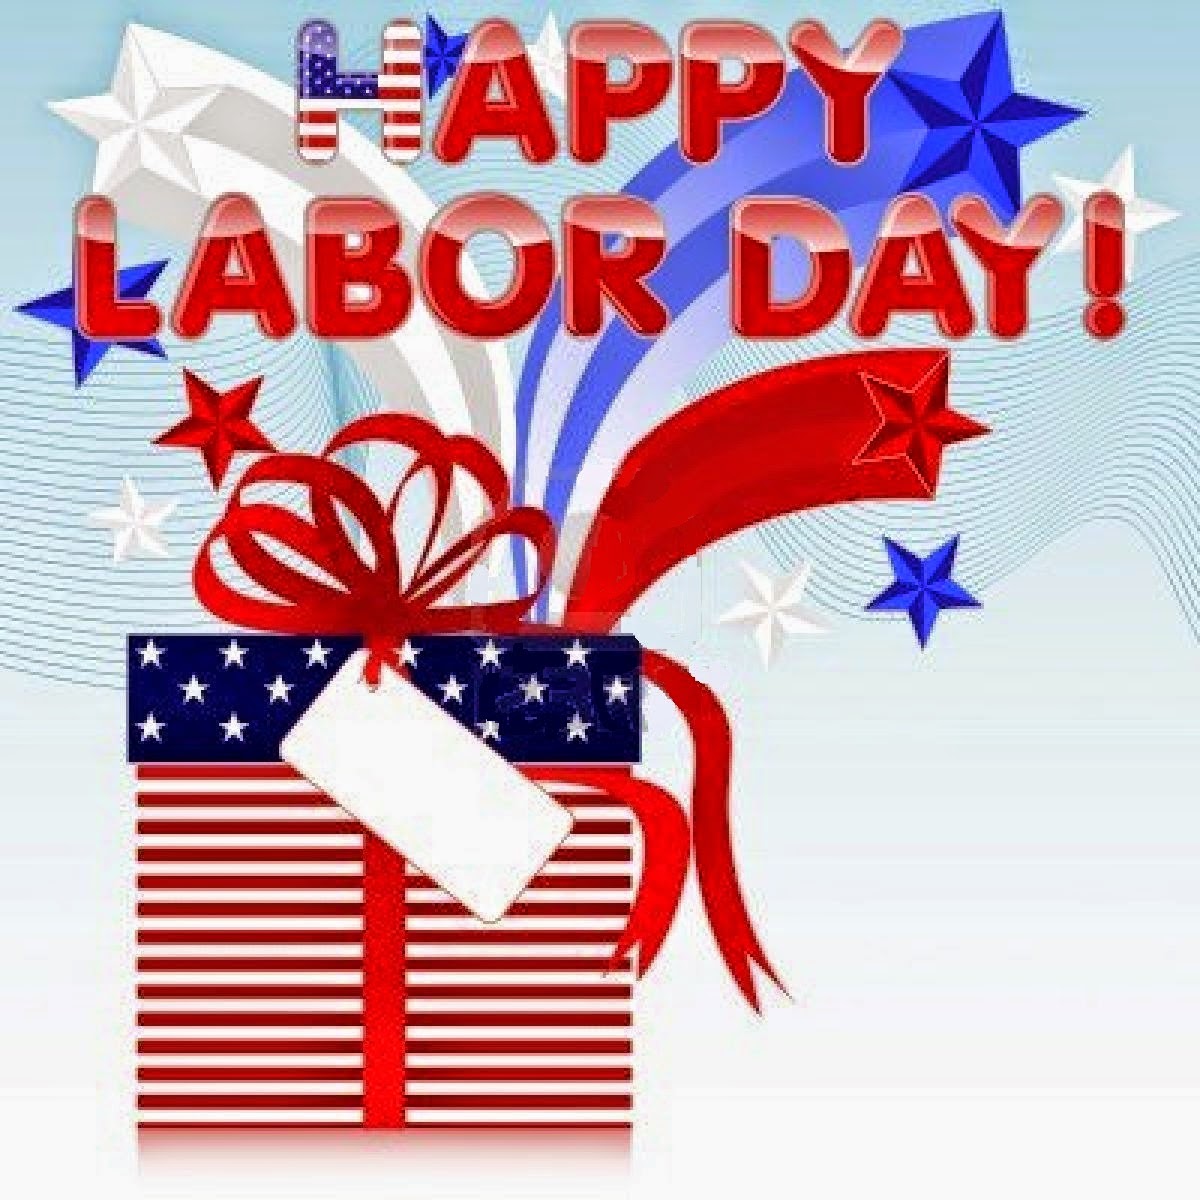 Happy Labour Day Celebration Wallpaper Holiday